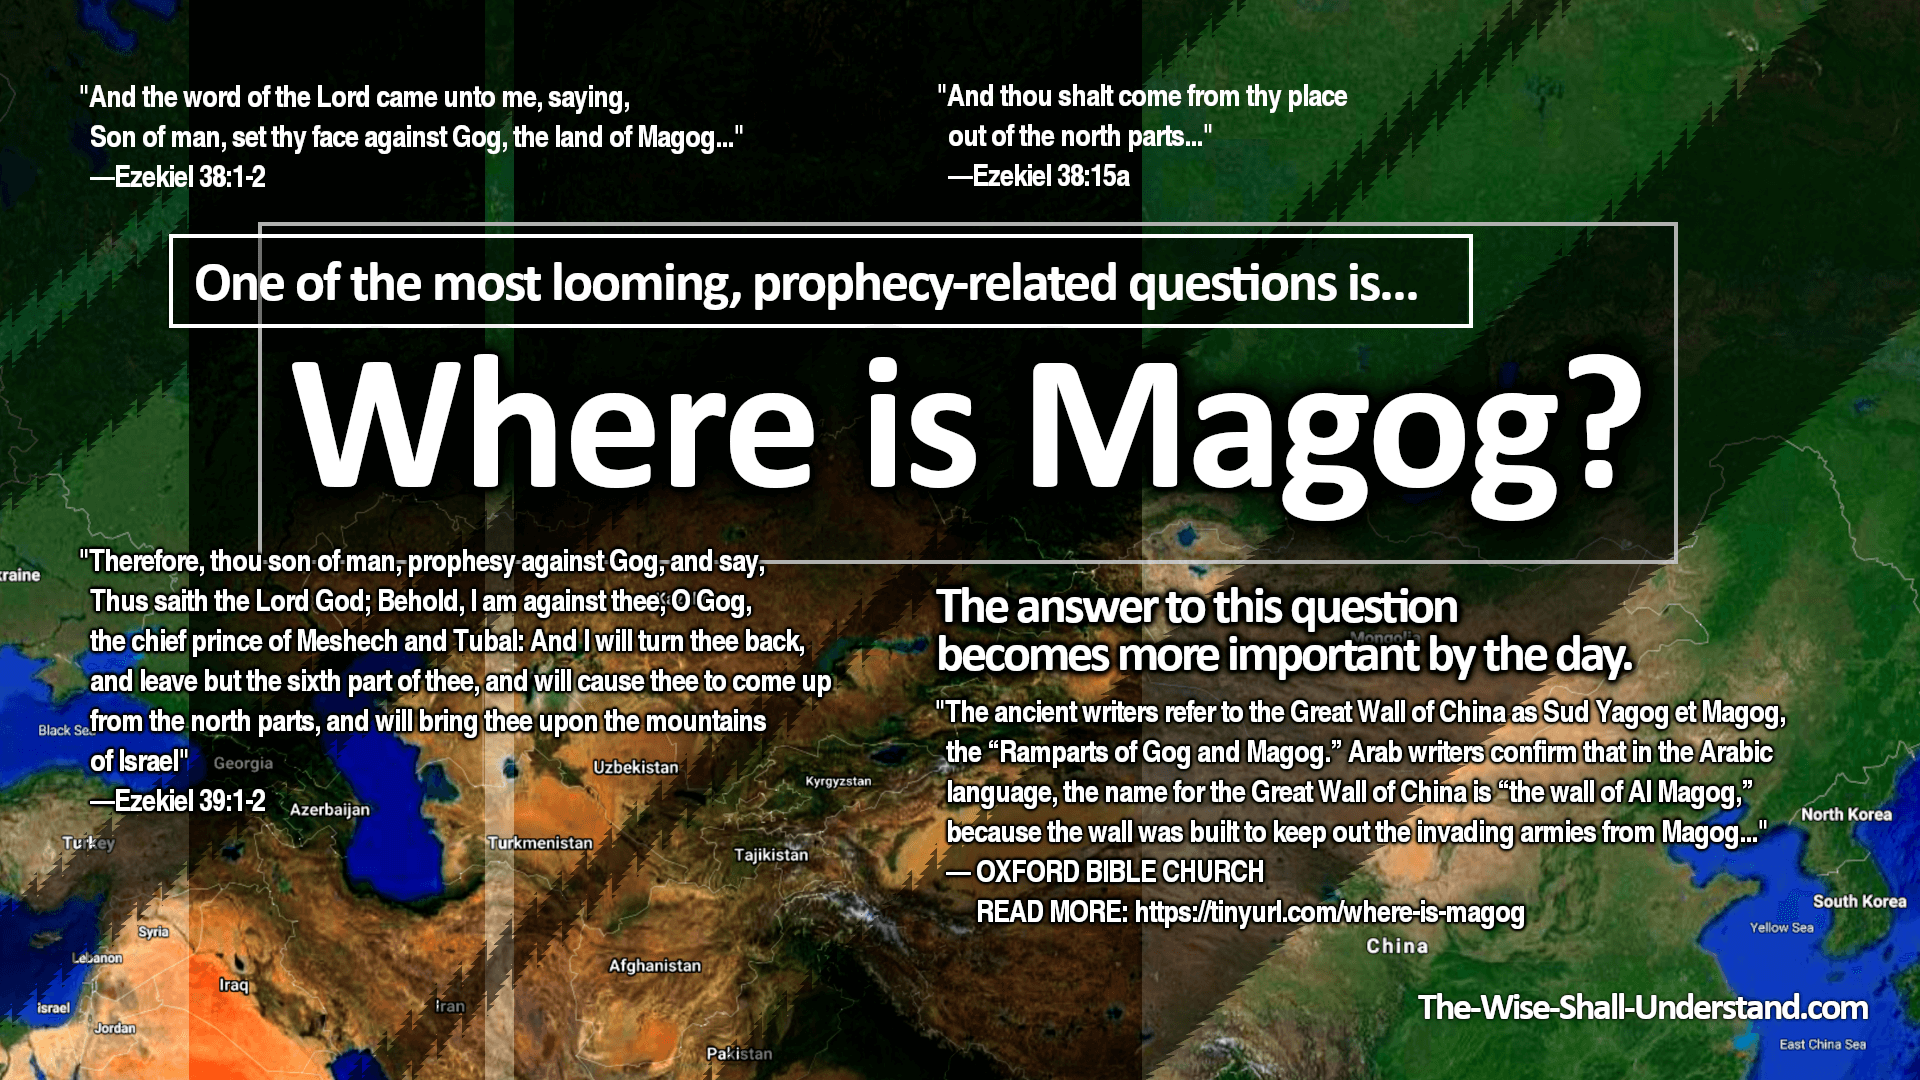 Where is Magog?